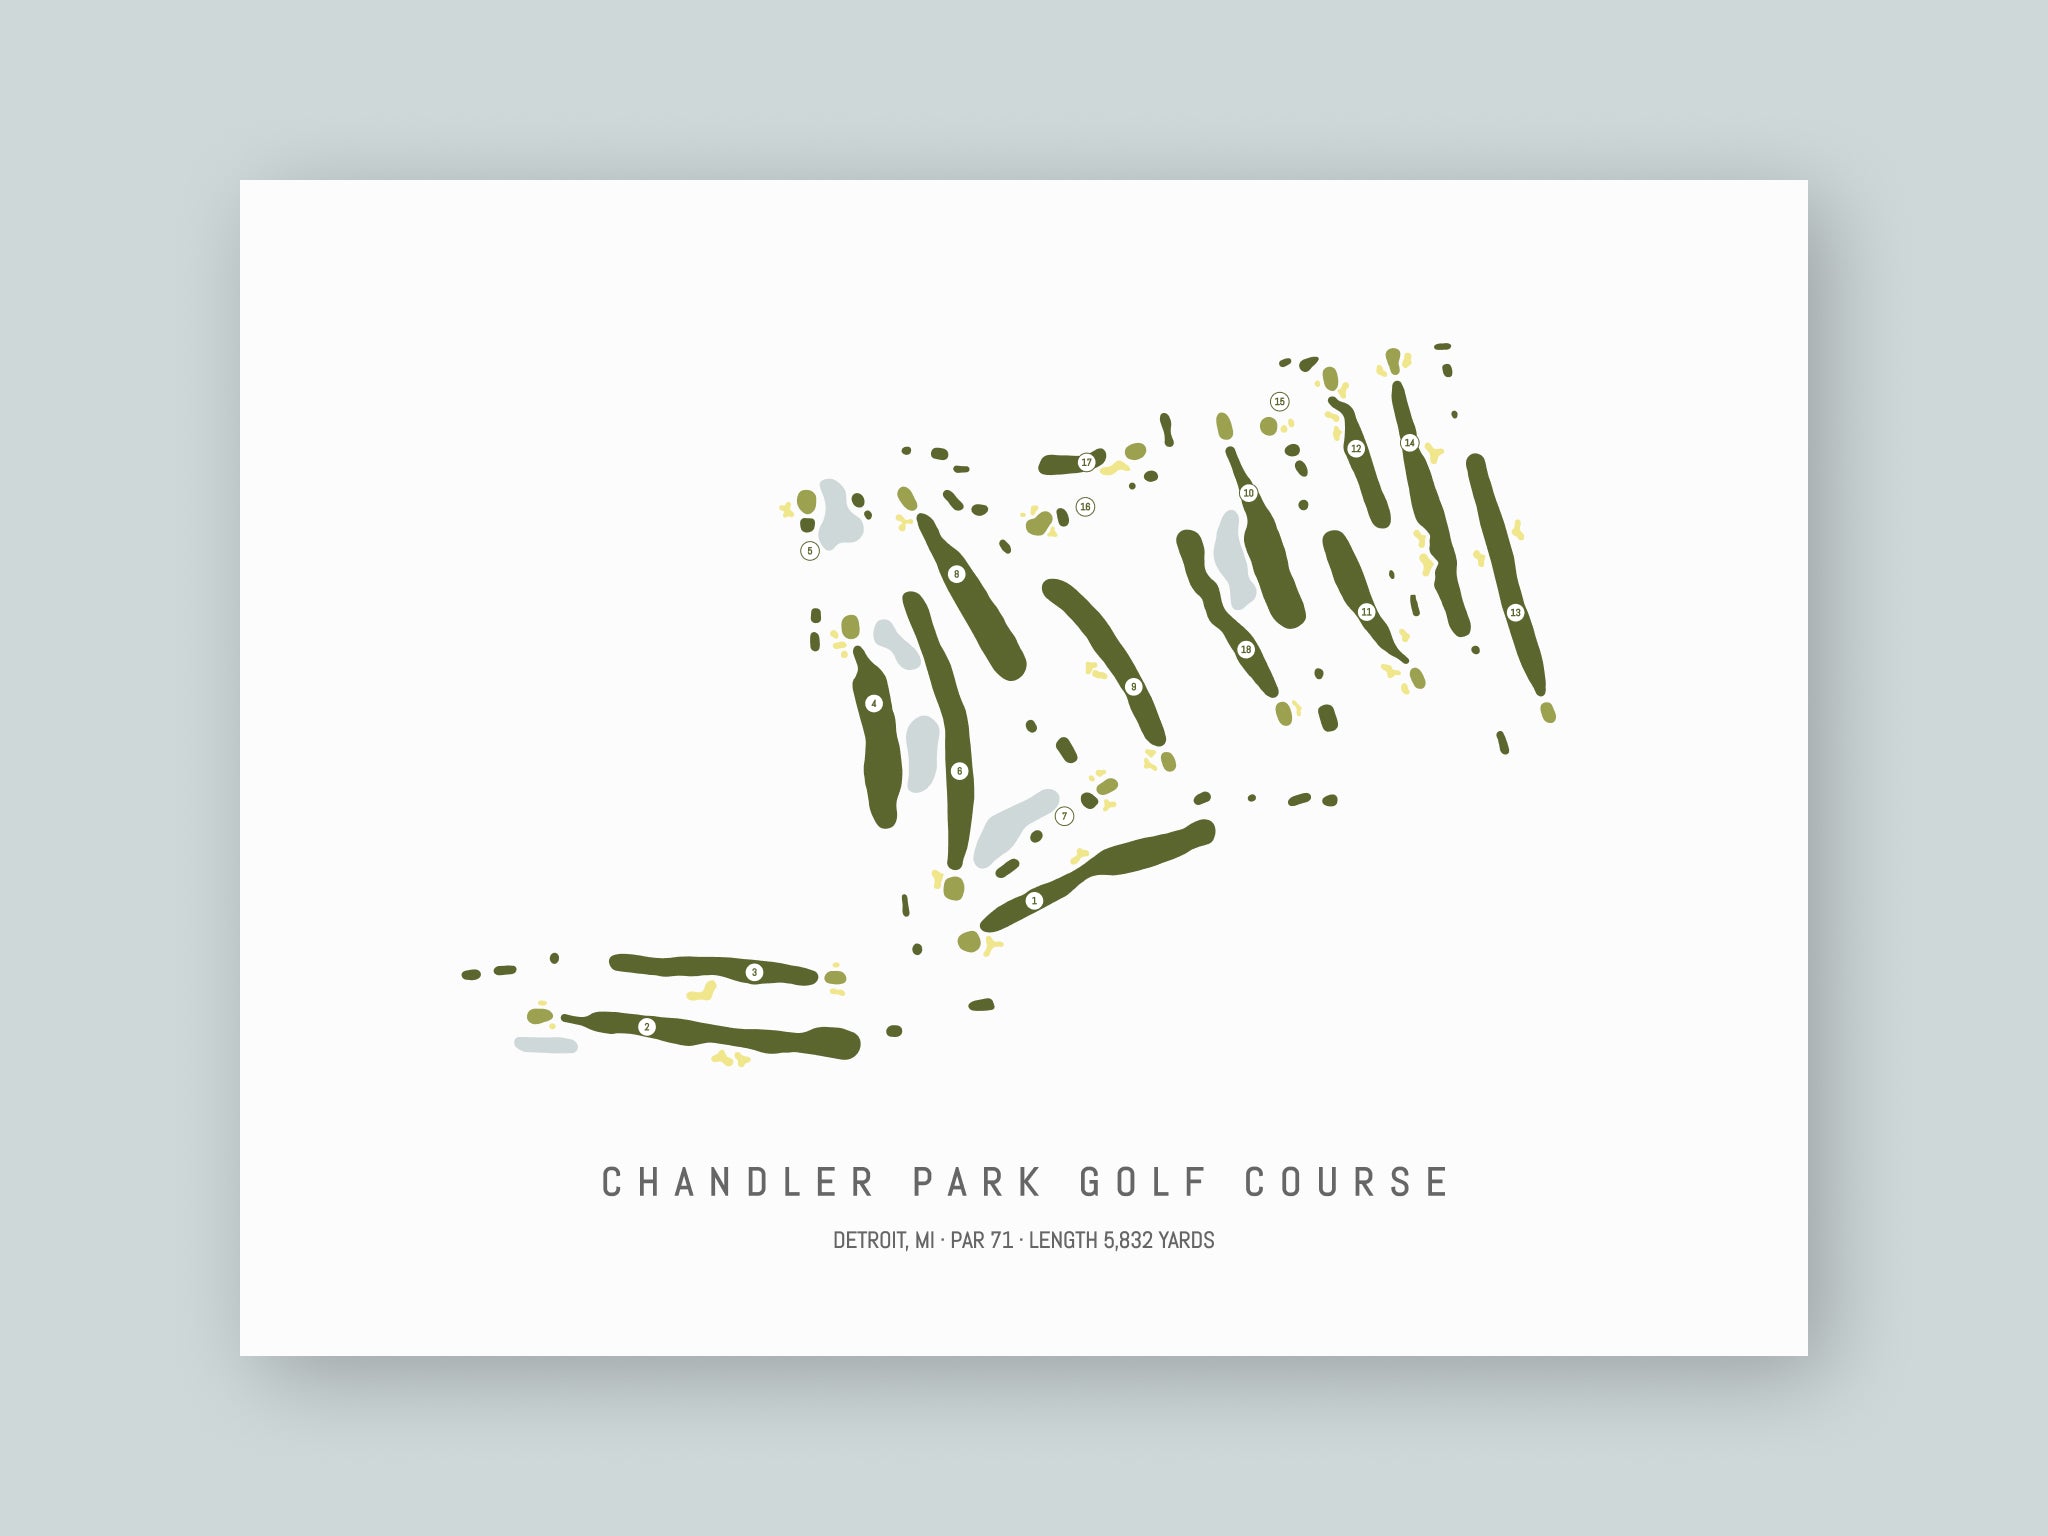 Chandler-Park-Golf-Course-MI--Unframed-24x18-With-Hole-Numbers